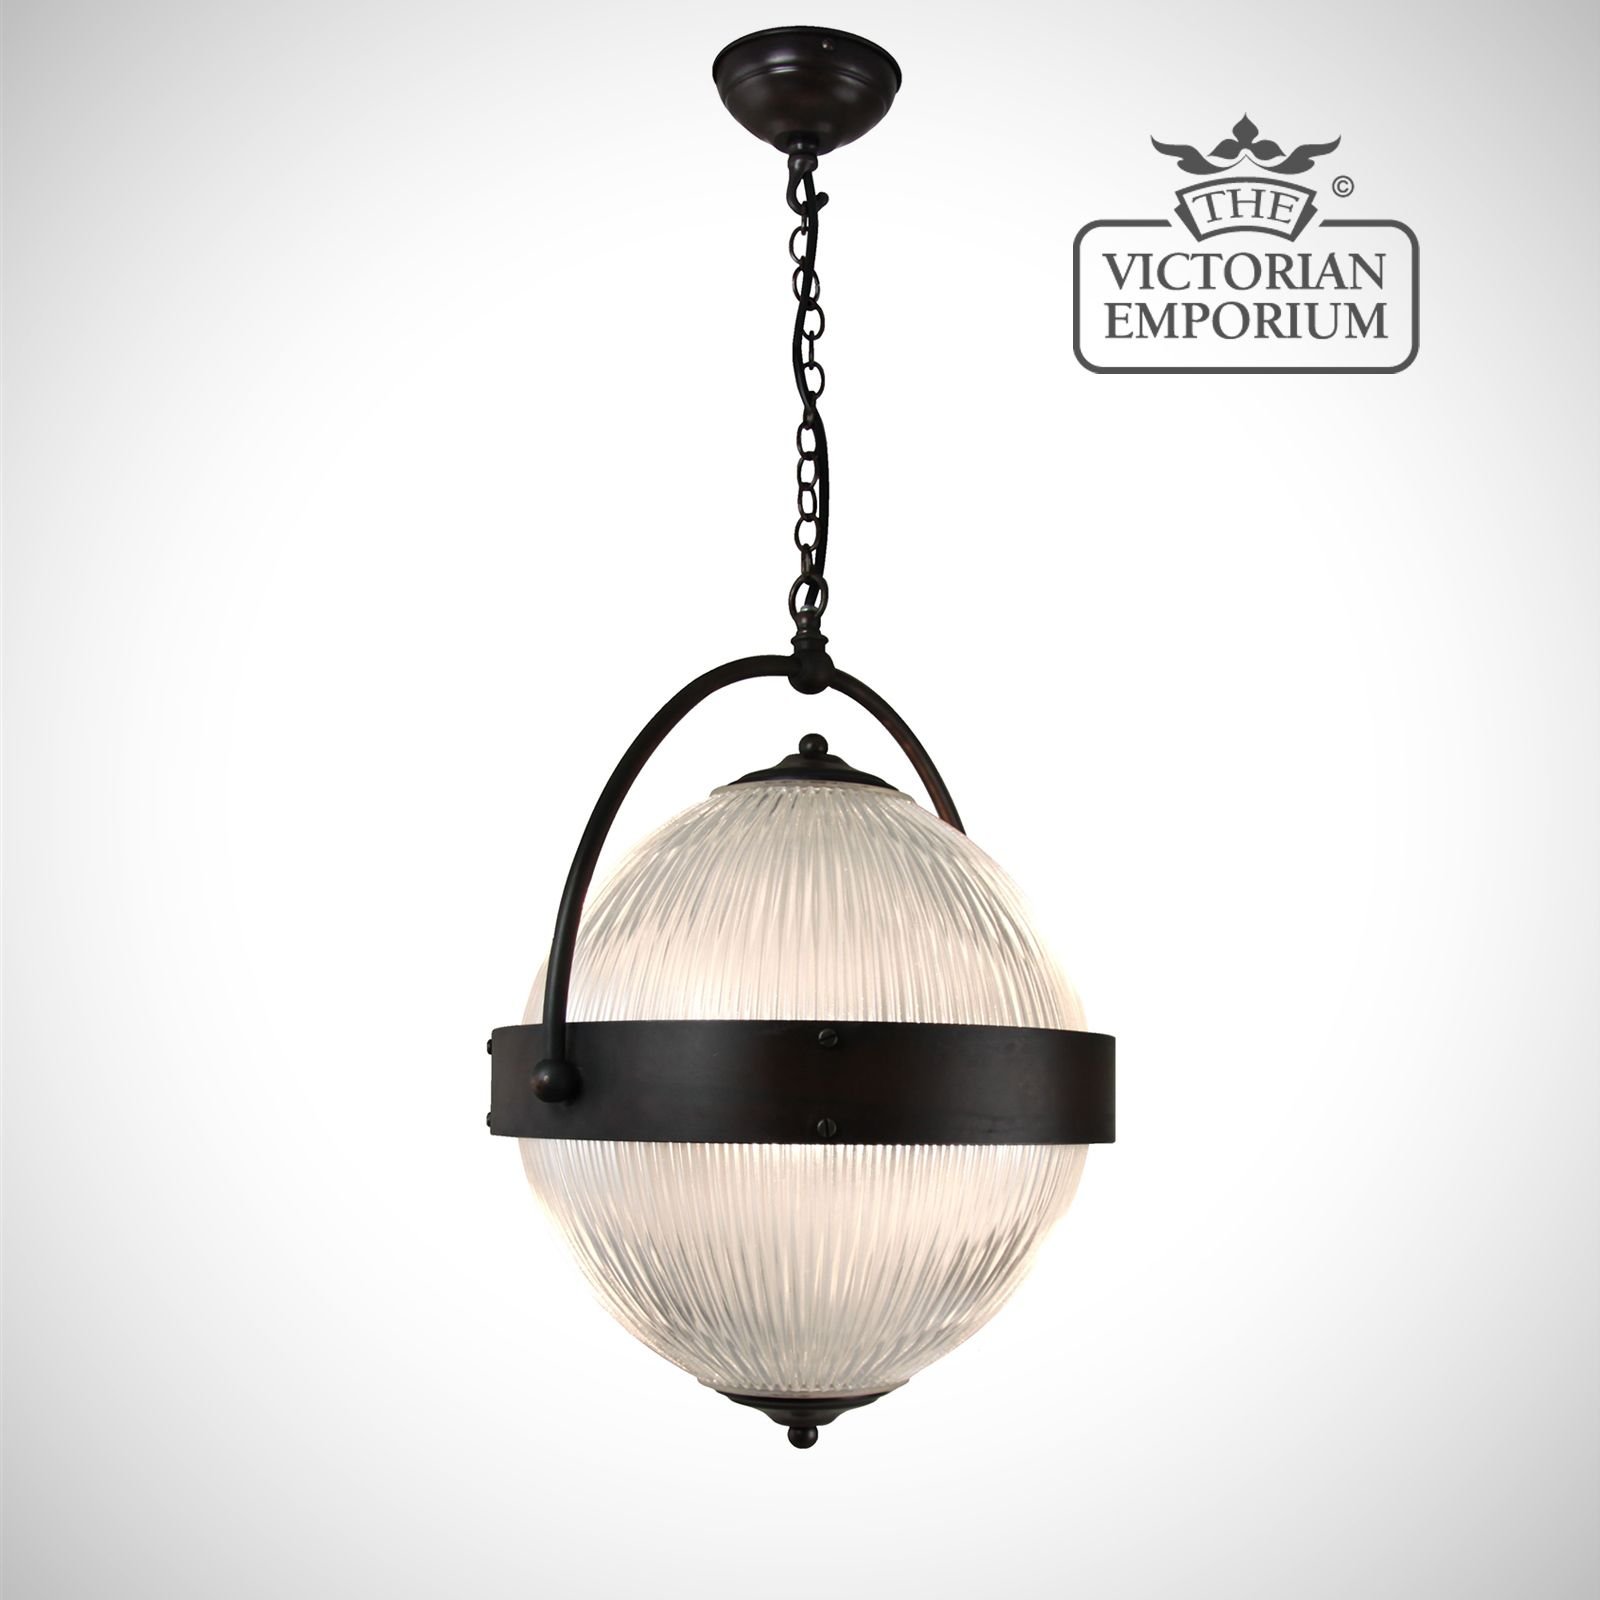 Reeded glass globe ceiling light with antique bronze central band